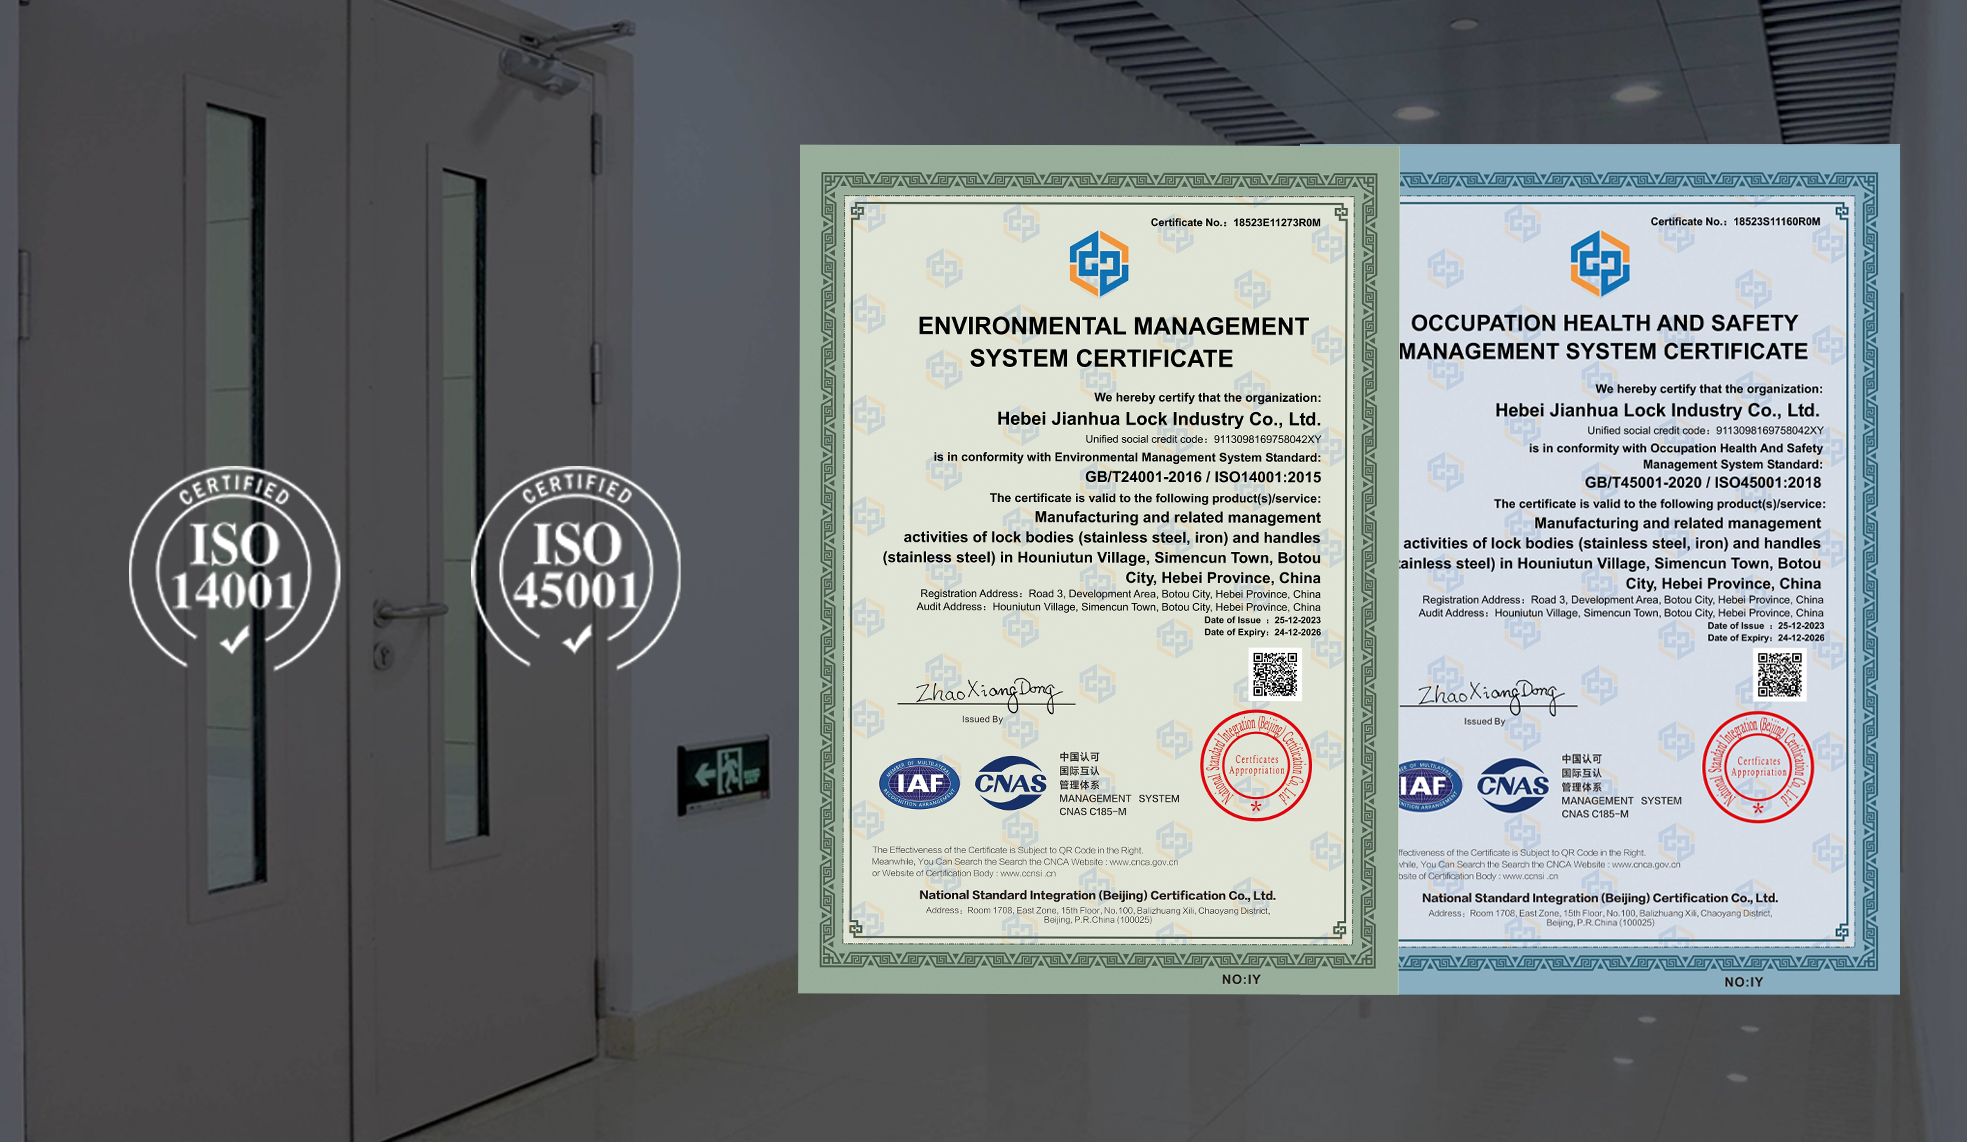 DIROCK DOOR HARDWARE Achieves ISO14001 and ISO45001 Certification, Committed to Environmental and Occupational Health & Safety